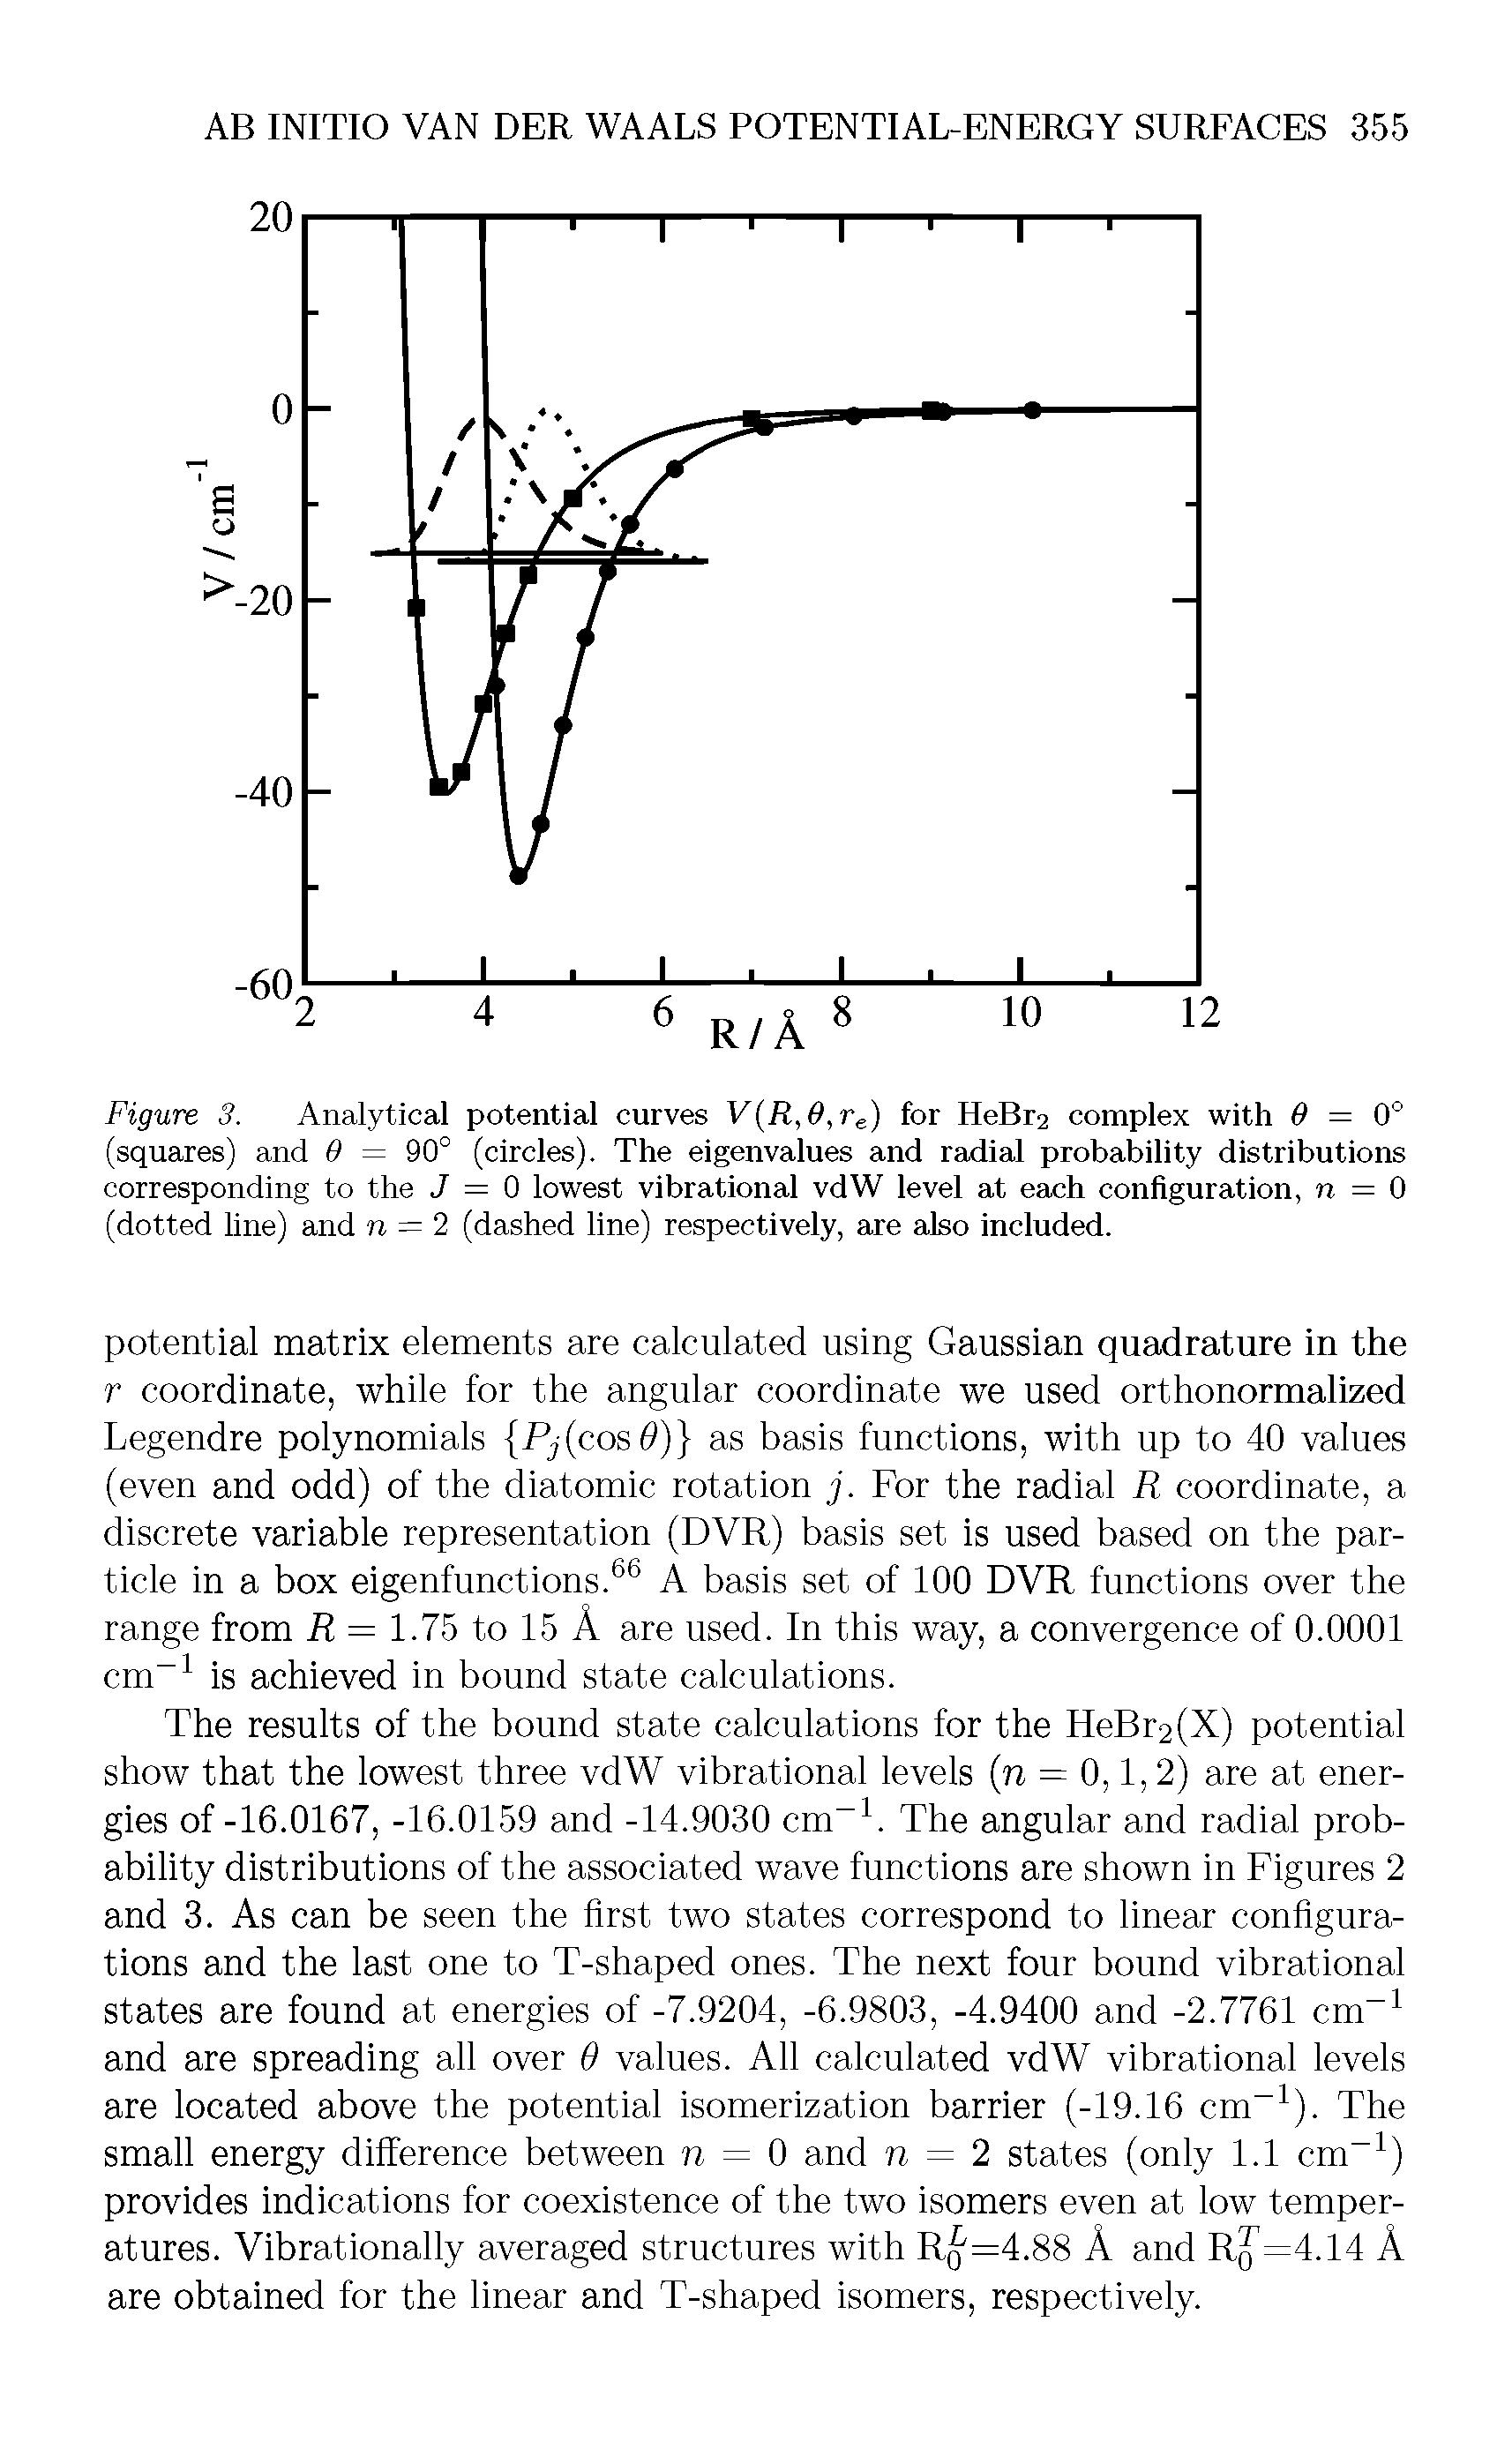 Figure 3. Analytical potential curves V(R,0,re) for HeBr2 complex with 0 = 0° (squares) and 0 = 90° (circles). The eigenvalues and radial probability distributions corresponding to the J = 0 lowest vibrational vdW level at each configuration, n = 0 (dotted line) and n = 2 (dashed line) respectively, are also included.